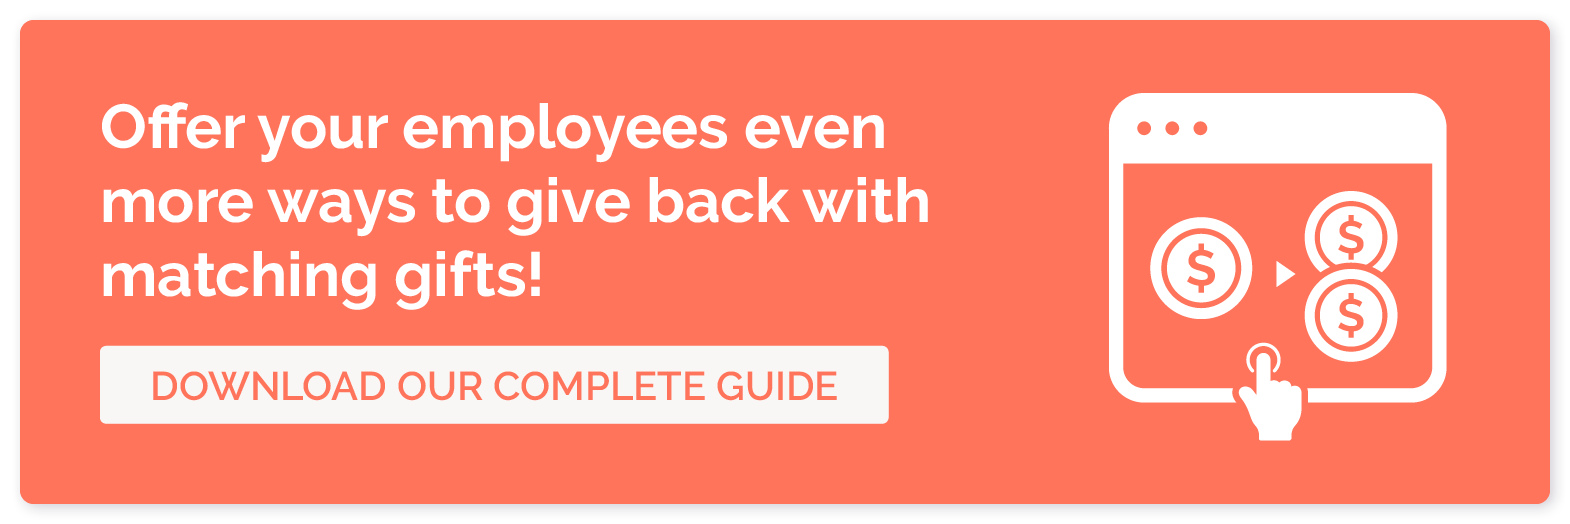 Offer your employees even more ways to give back with matching gifts! Download our complete guide.